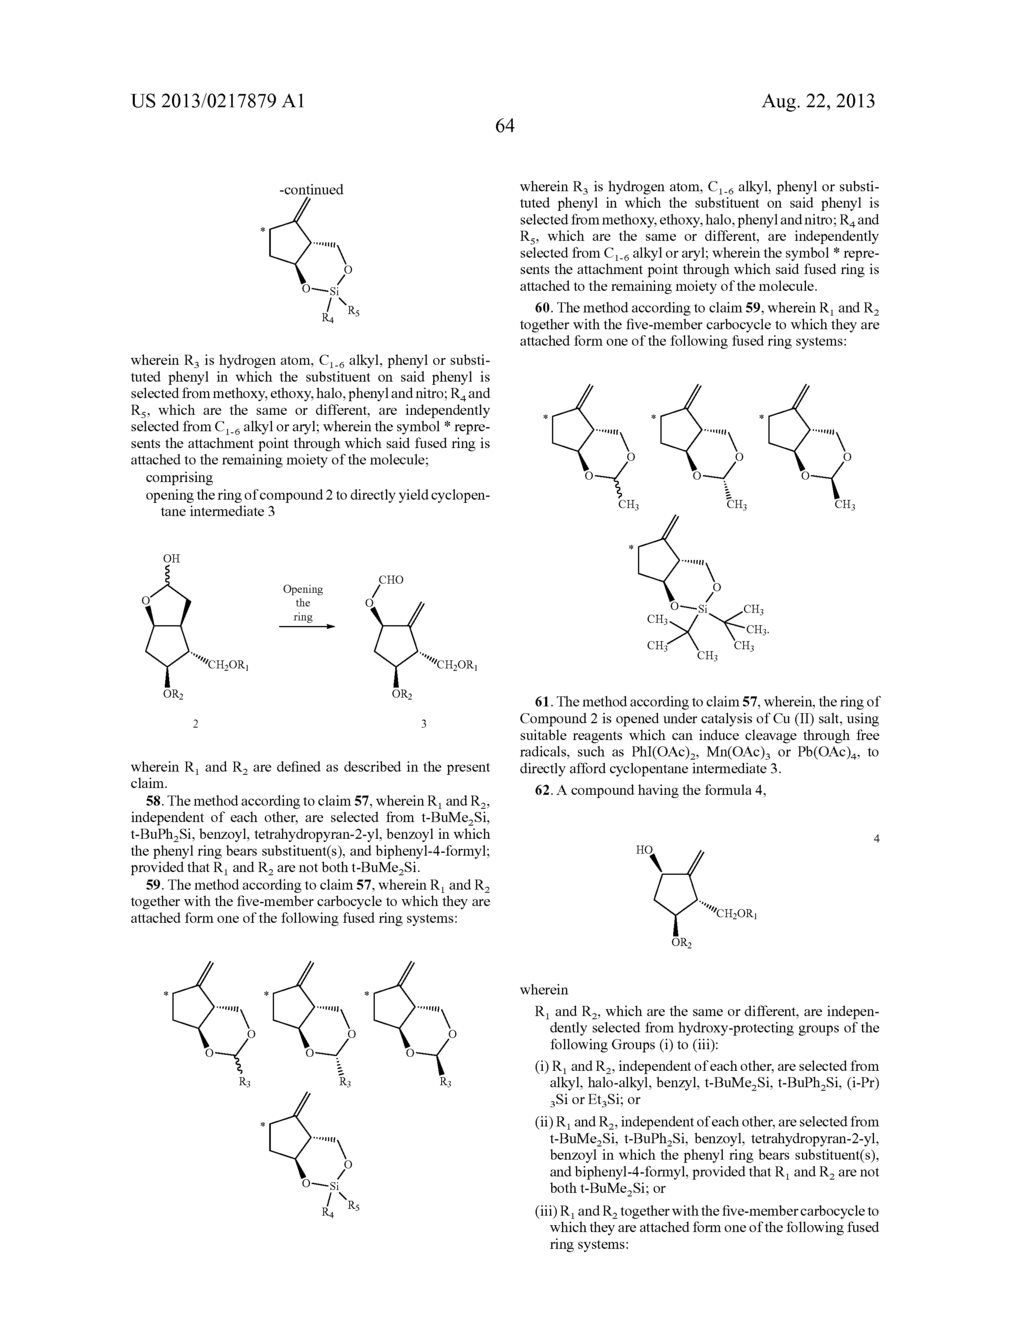 ENTECAVIR SYNTHESIS METHOD AND INTERMEDIATE COMPOUND THEREOF - diagram, schematic, and image 65